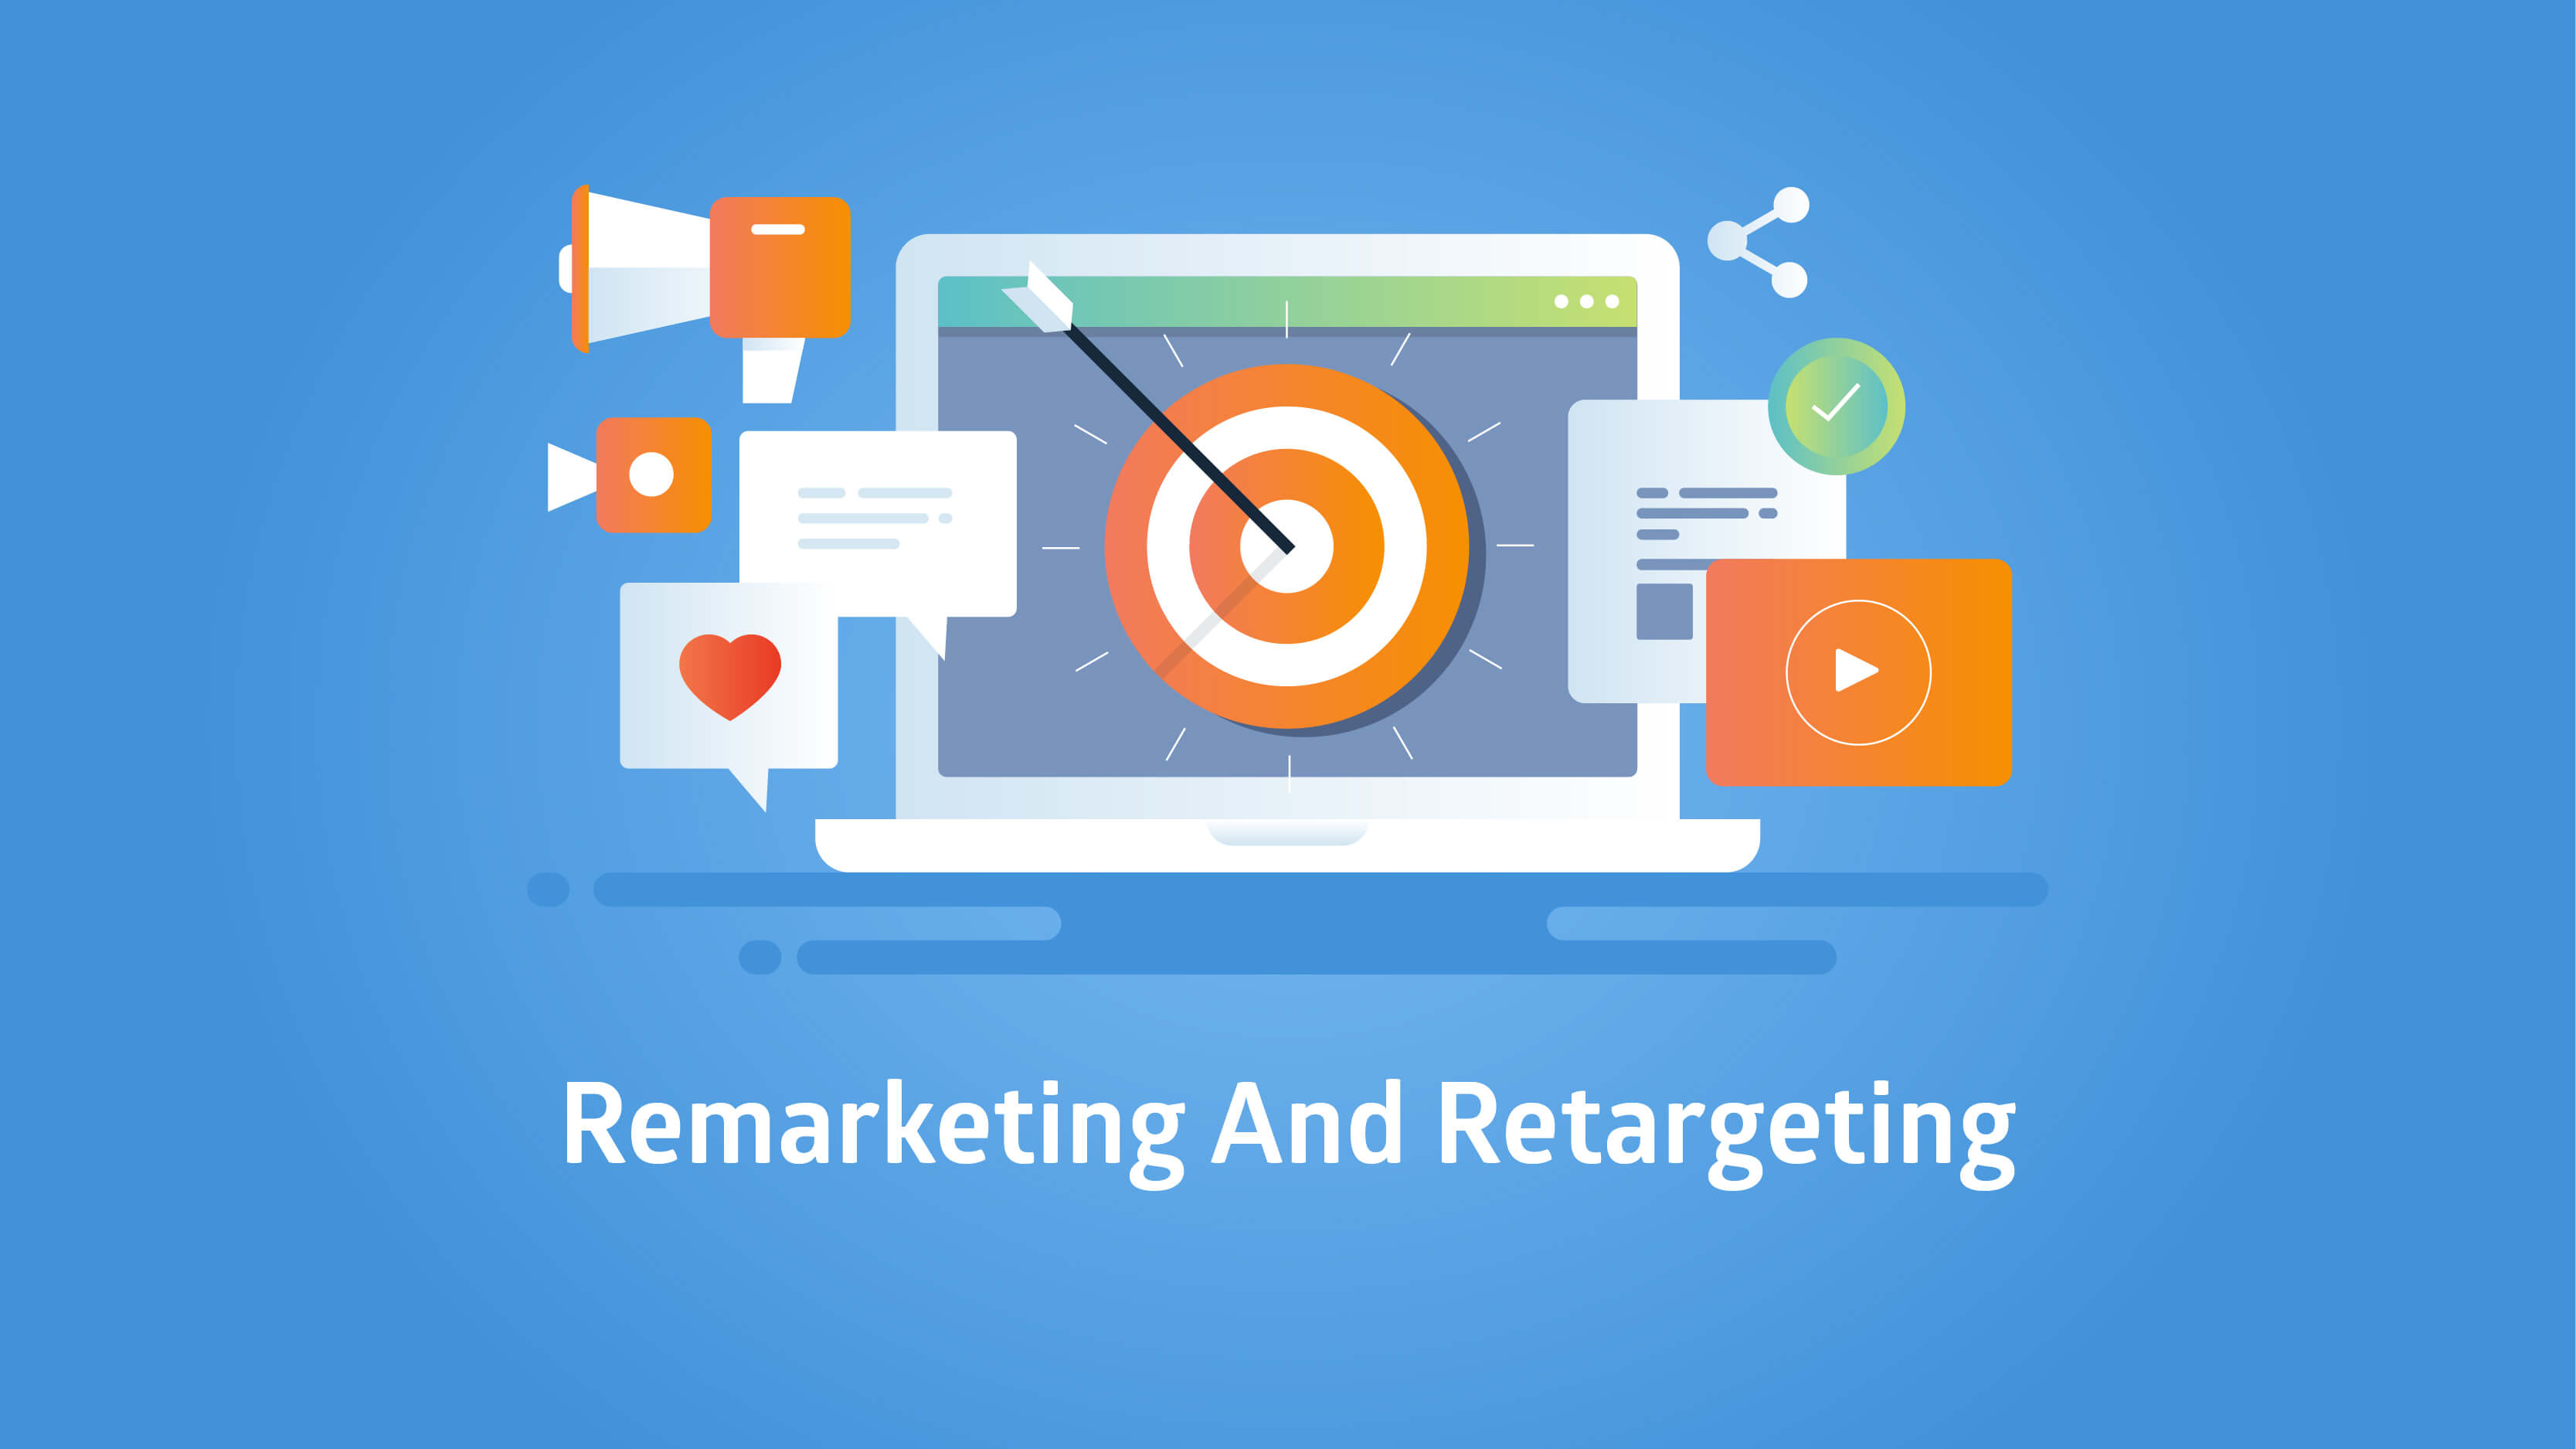 What Is The Difference Between Remarketing And Retargeting? Which One Should You Choose?